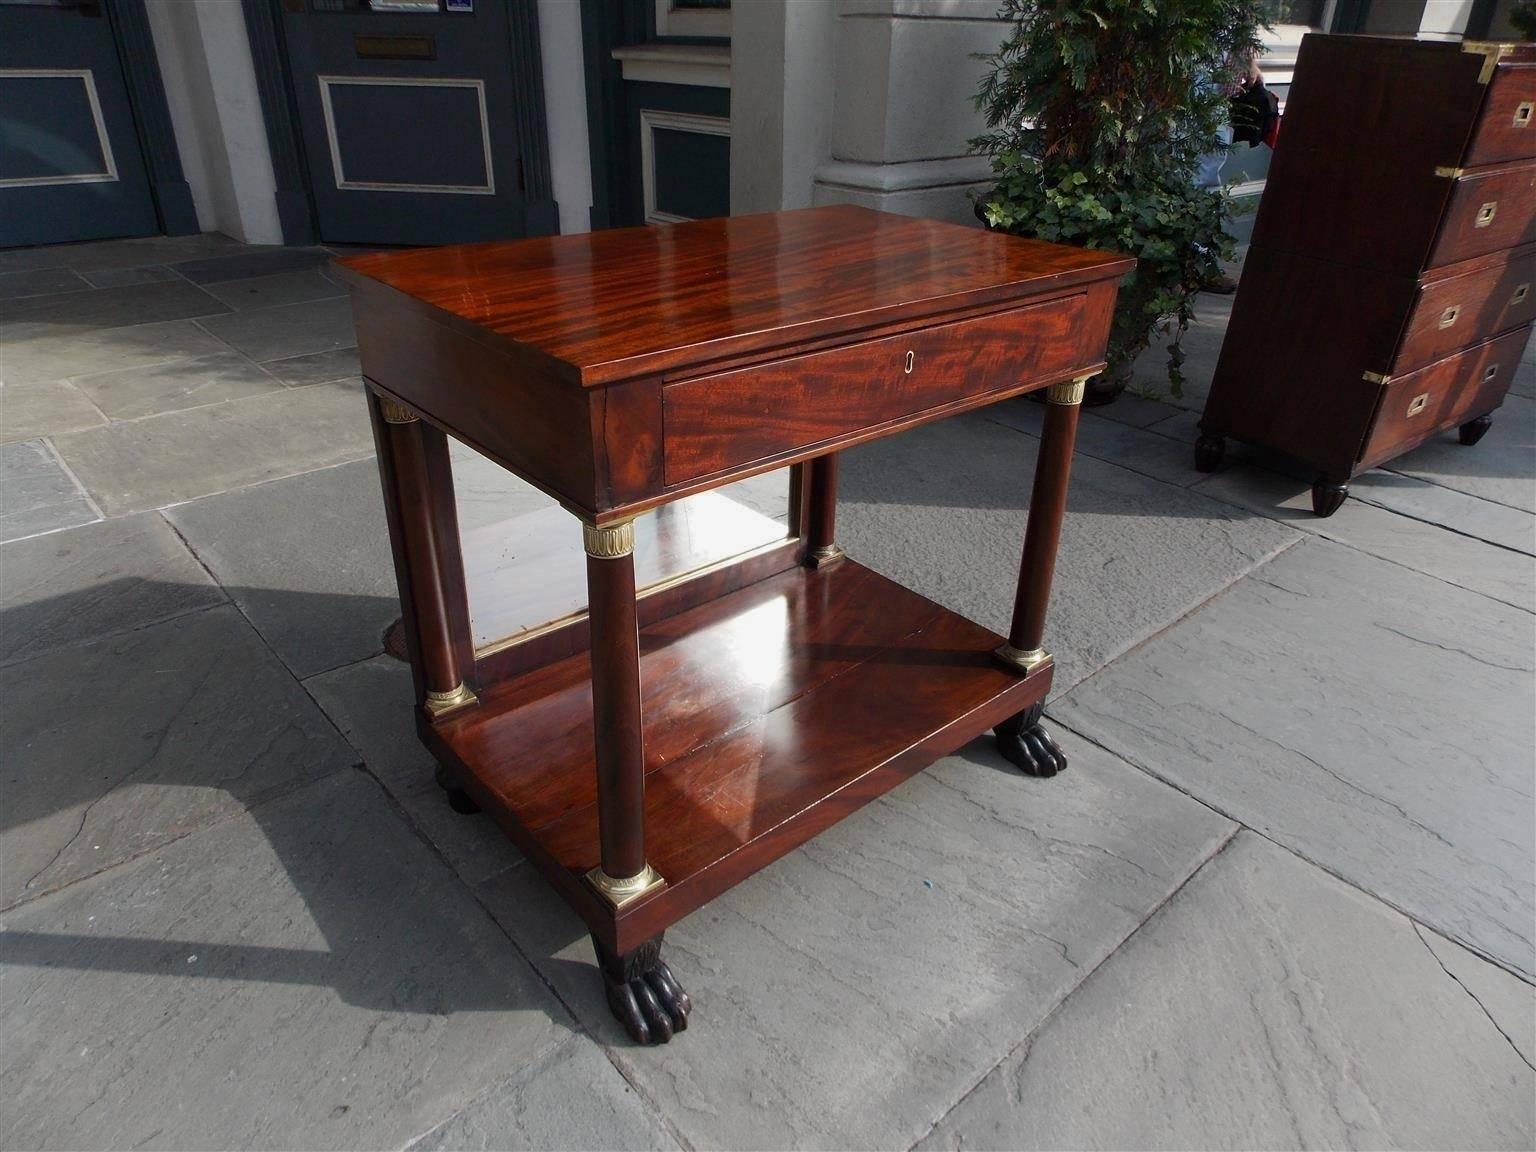 French mahogany one-drawer console with one board top, original ormolu mounts, original brass banded mirrored back, turned columns, lower shelf, and terminating on ebonized lions paw feet, Late 18th century. Console is finished on all sides.